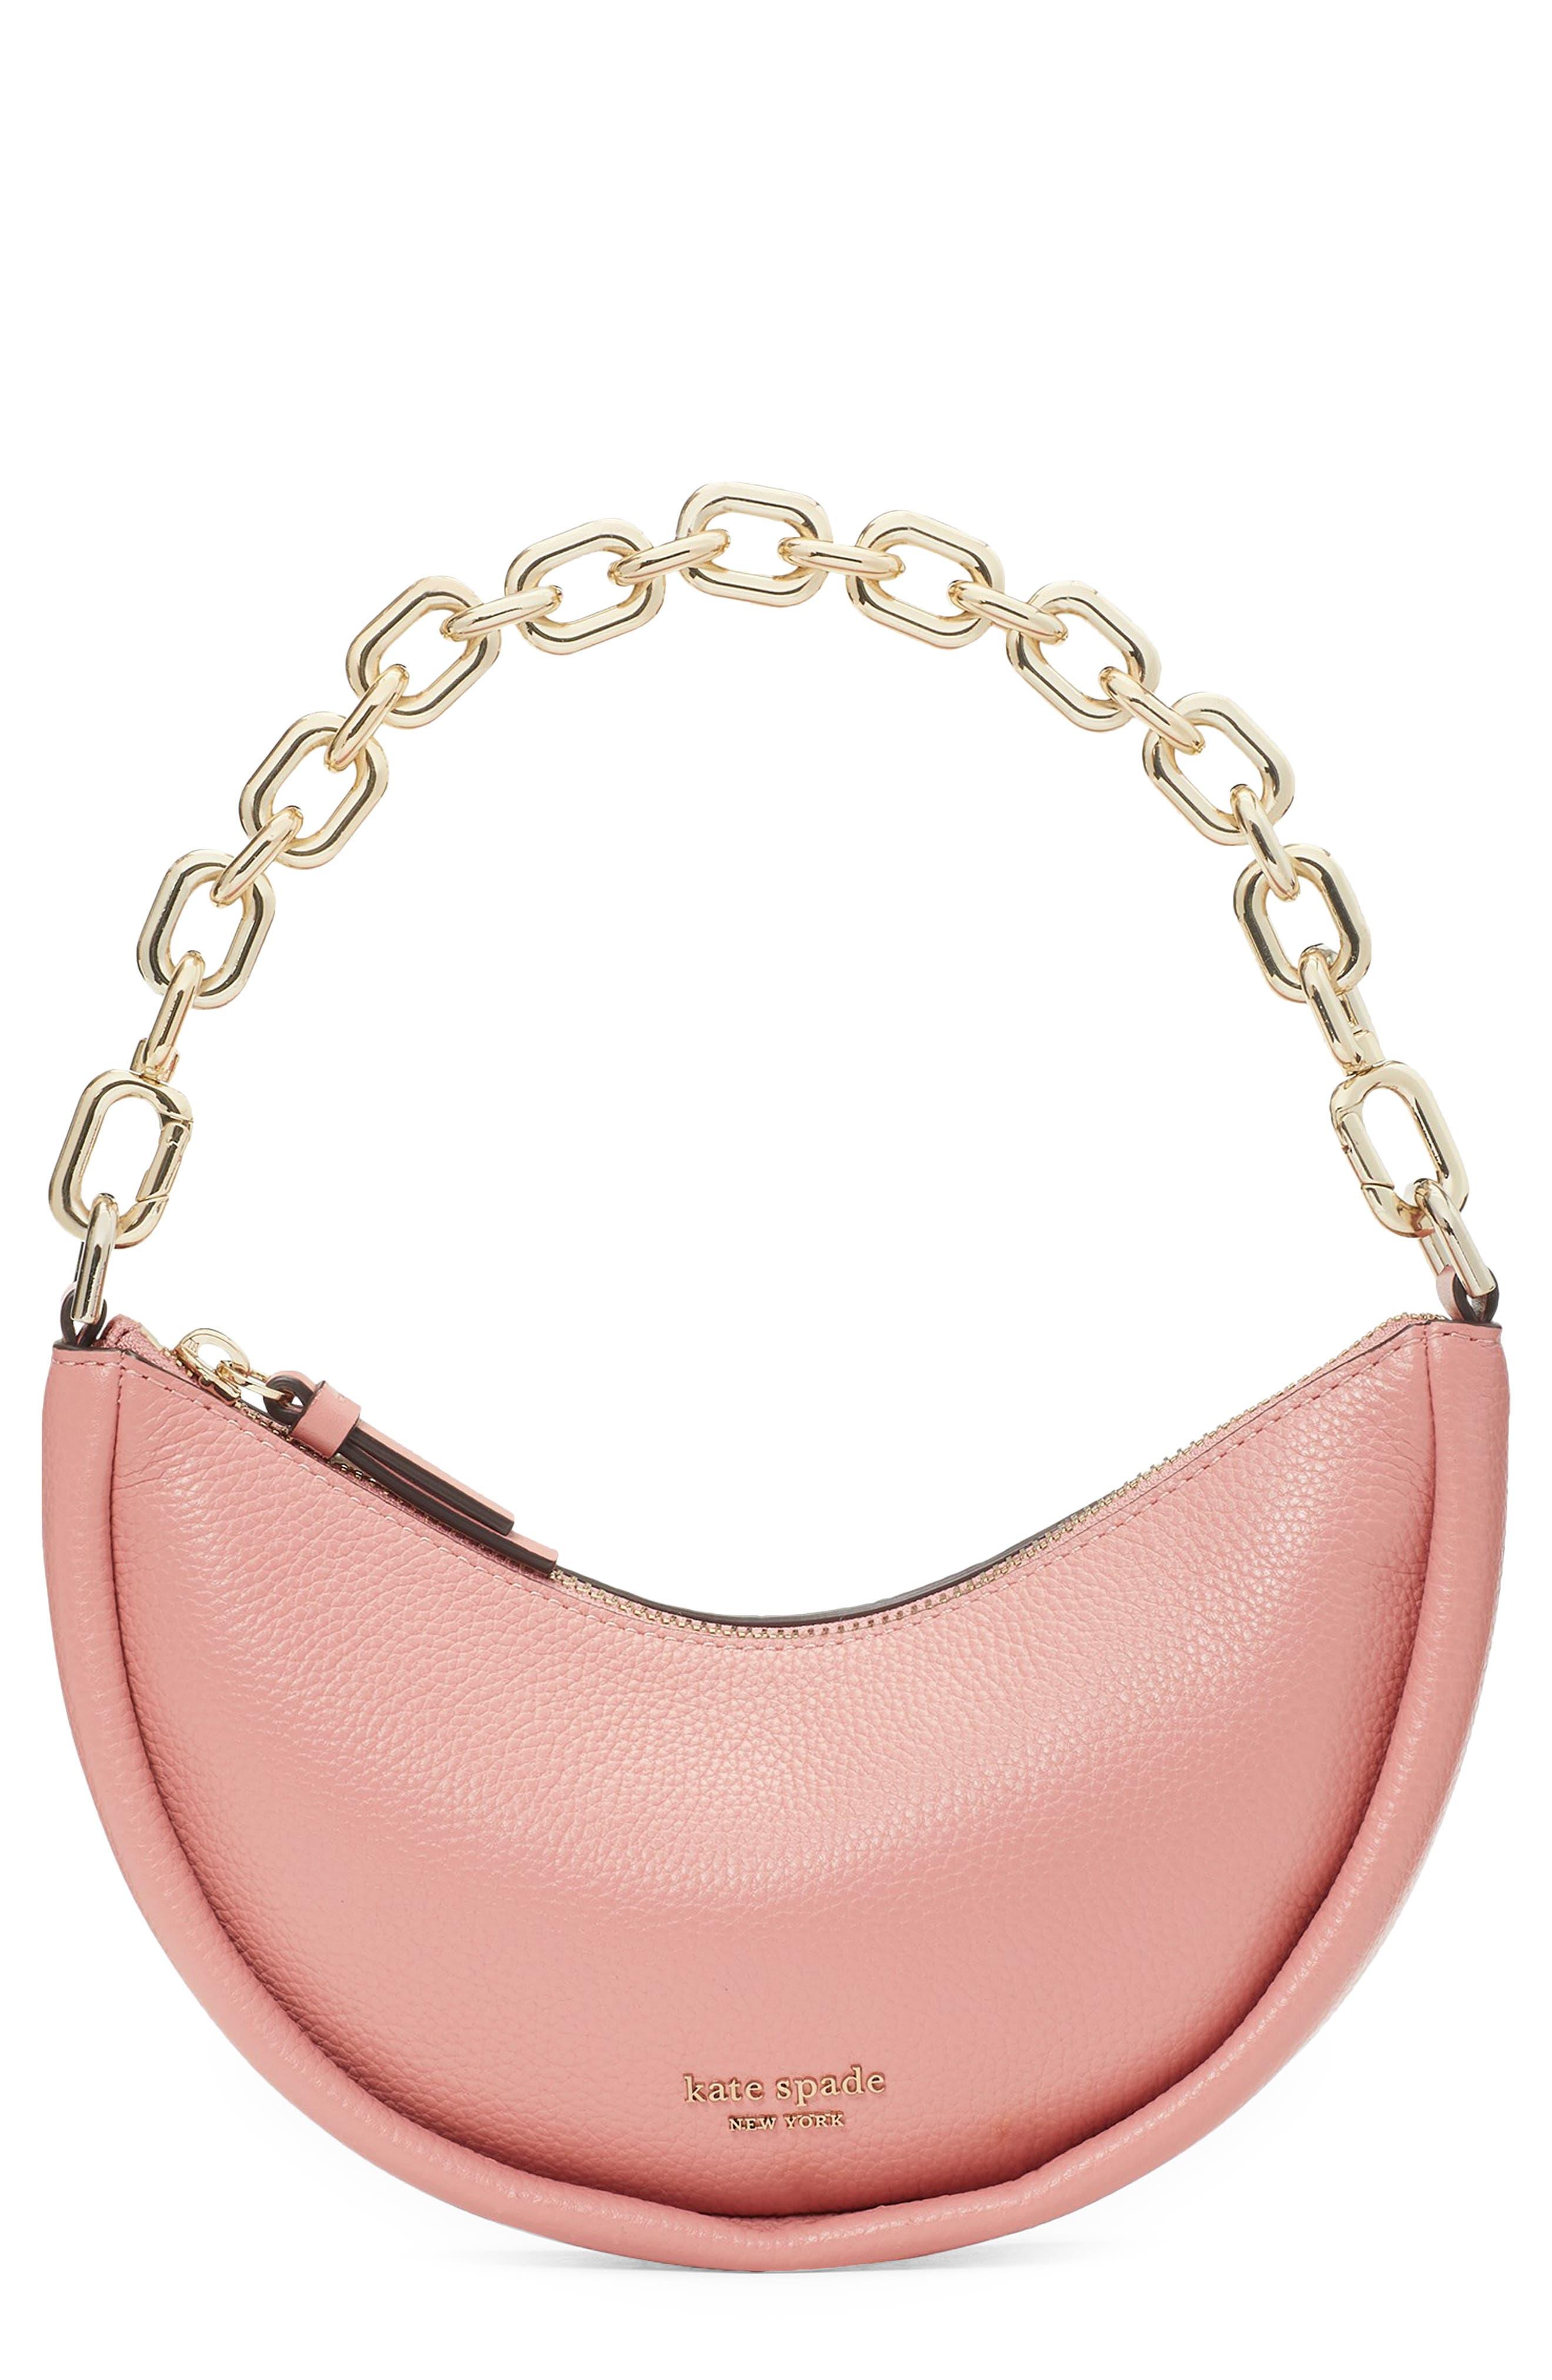 Kate Spade Small Smile Pebbled Leather Crossbody Bag in Pink | Lyst